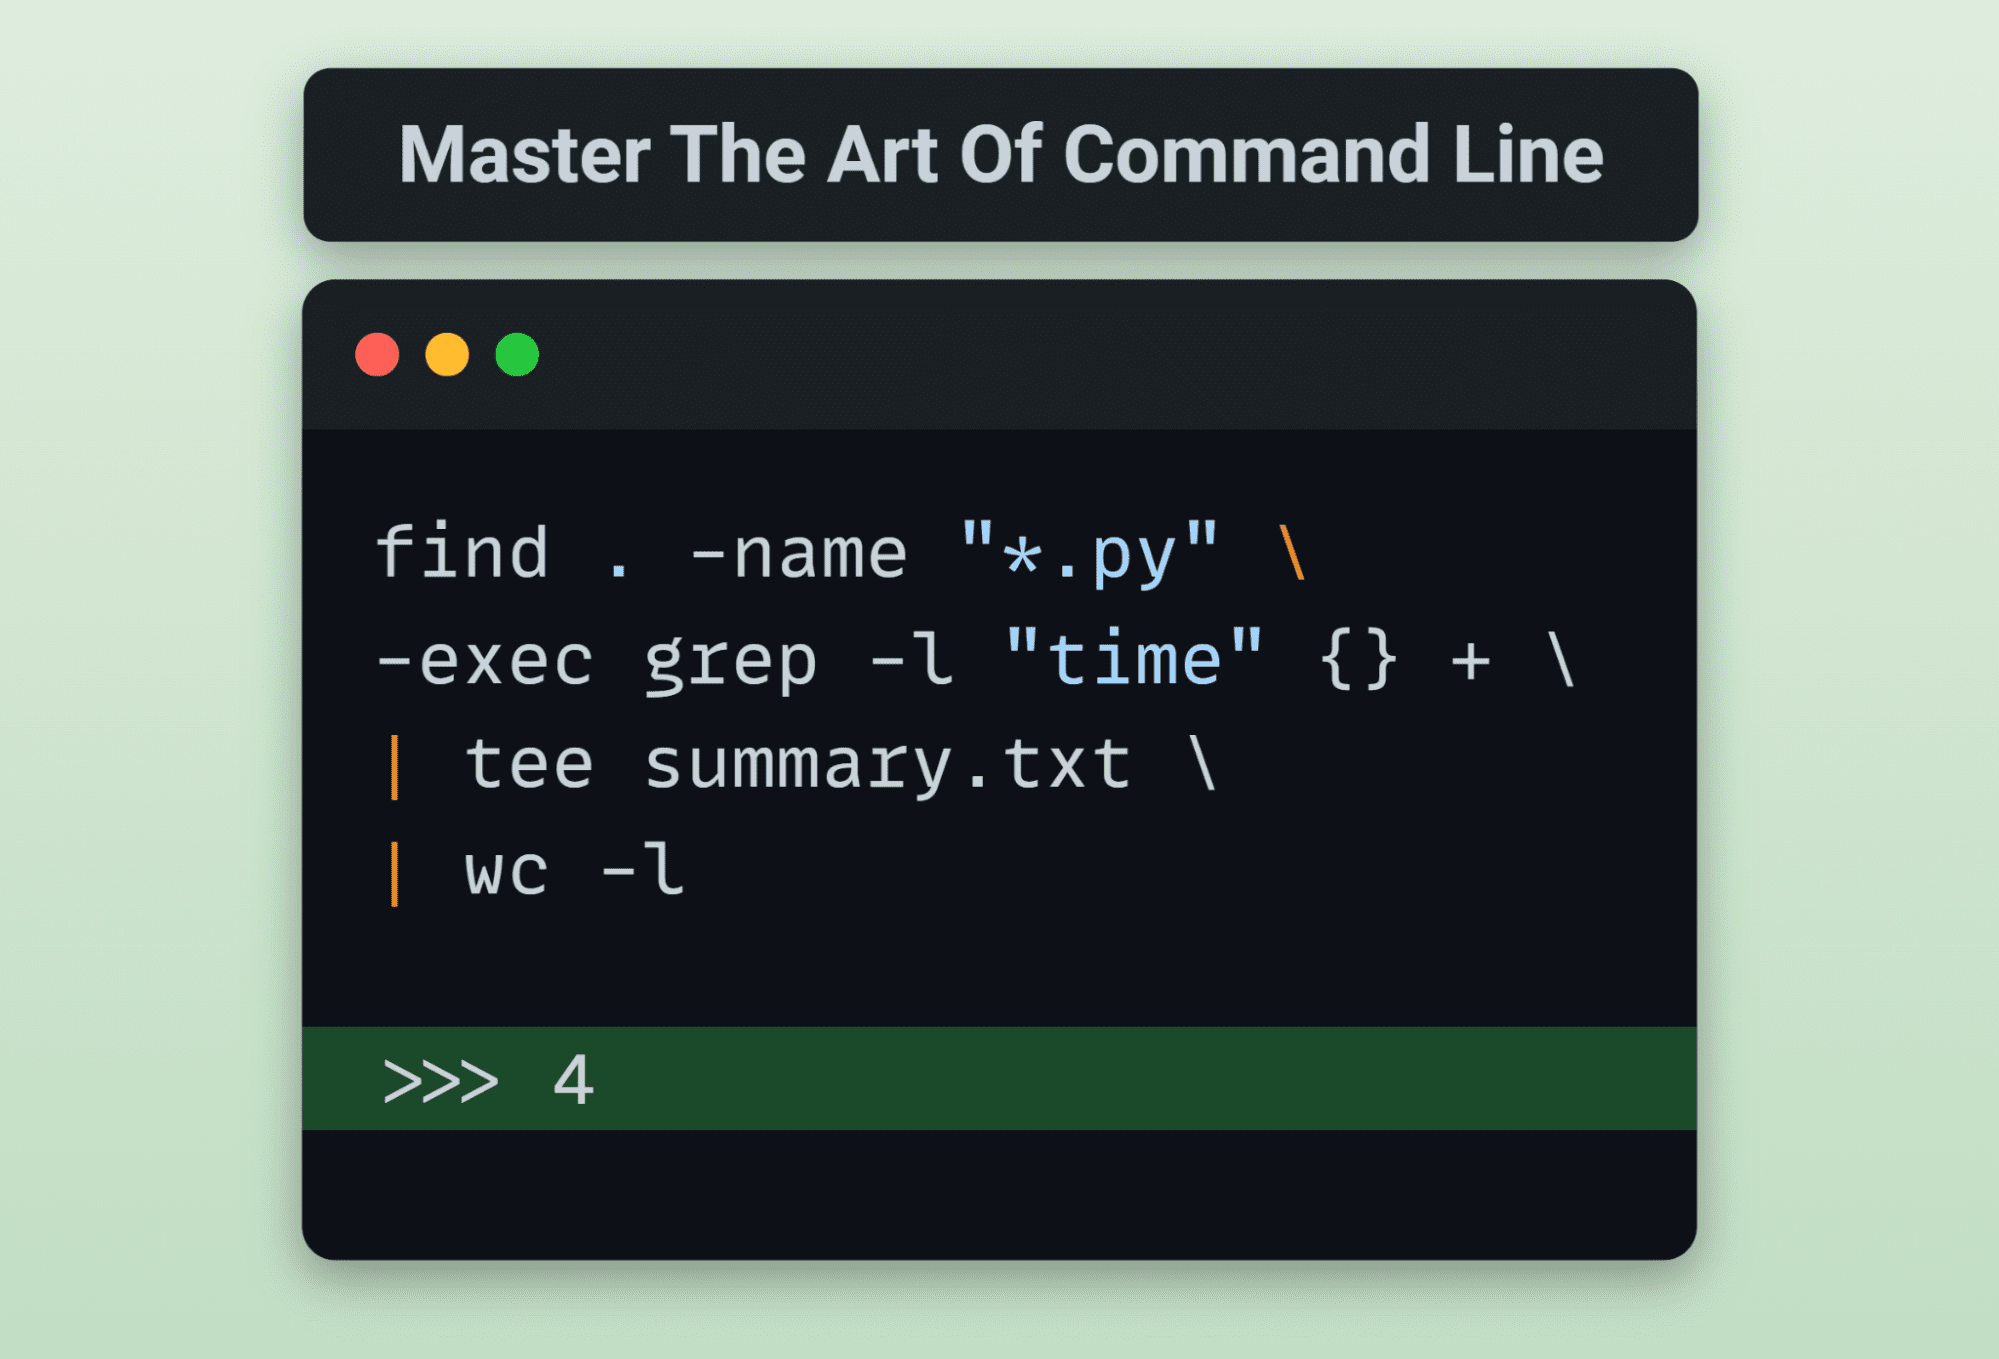 Grasp The Artwork Of Command Line With This GitHub Repository – KDnuggets #Imaginations Hub